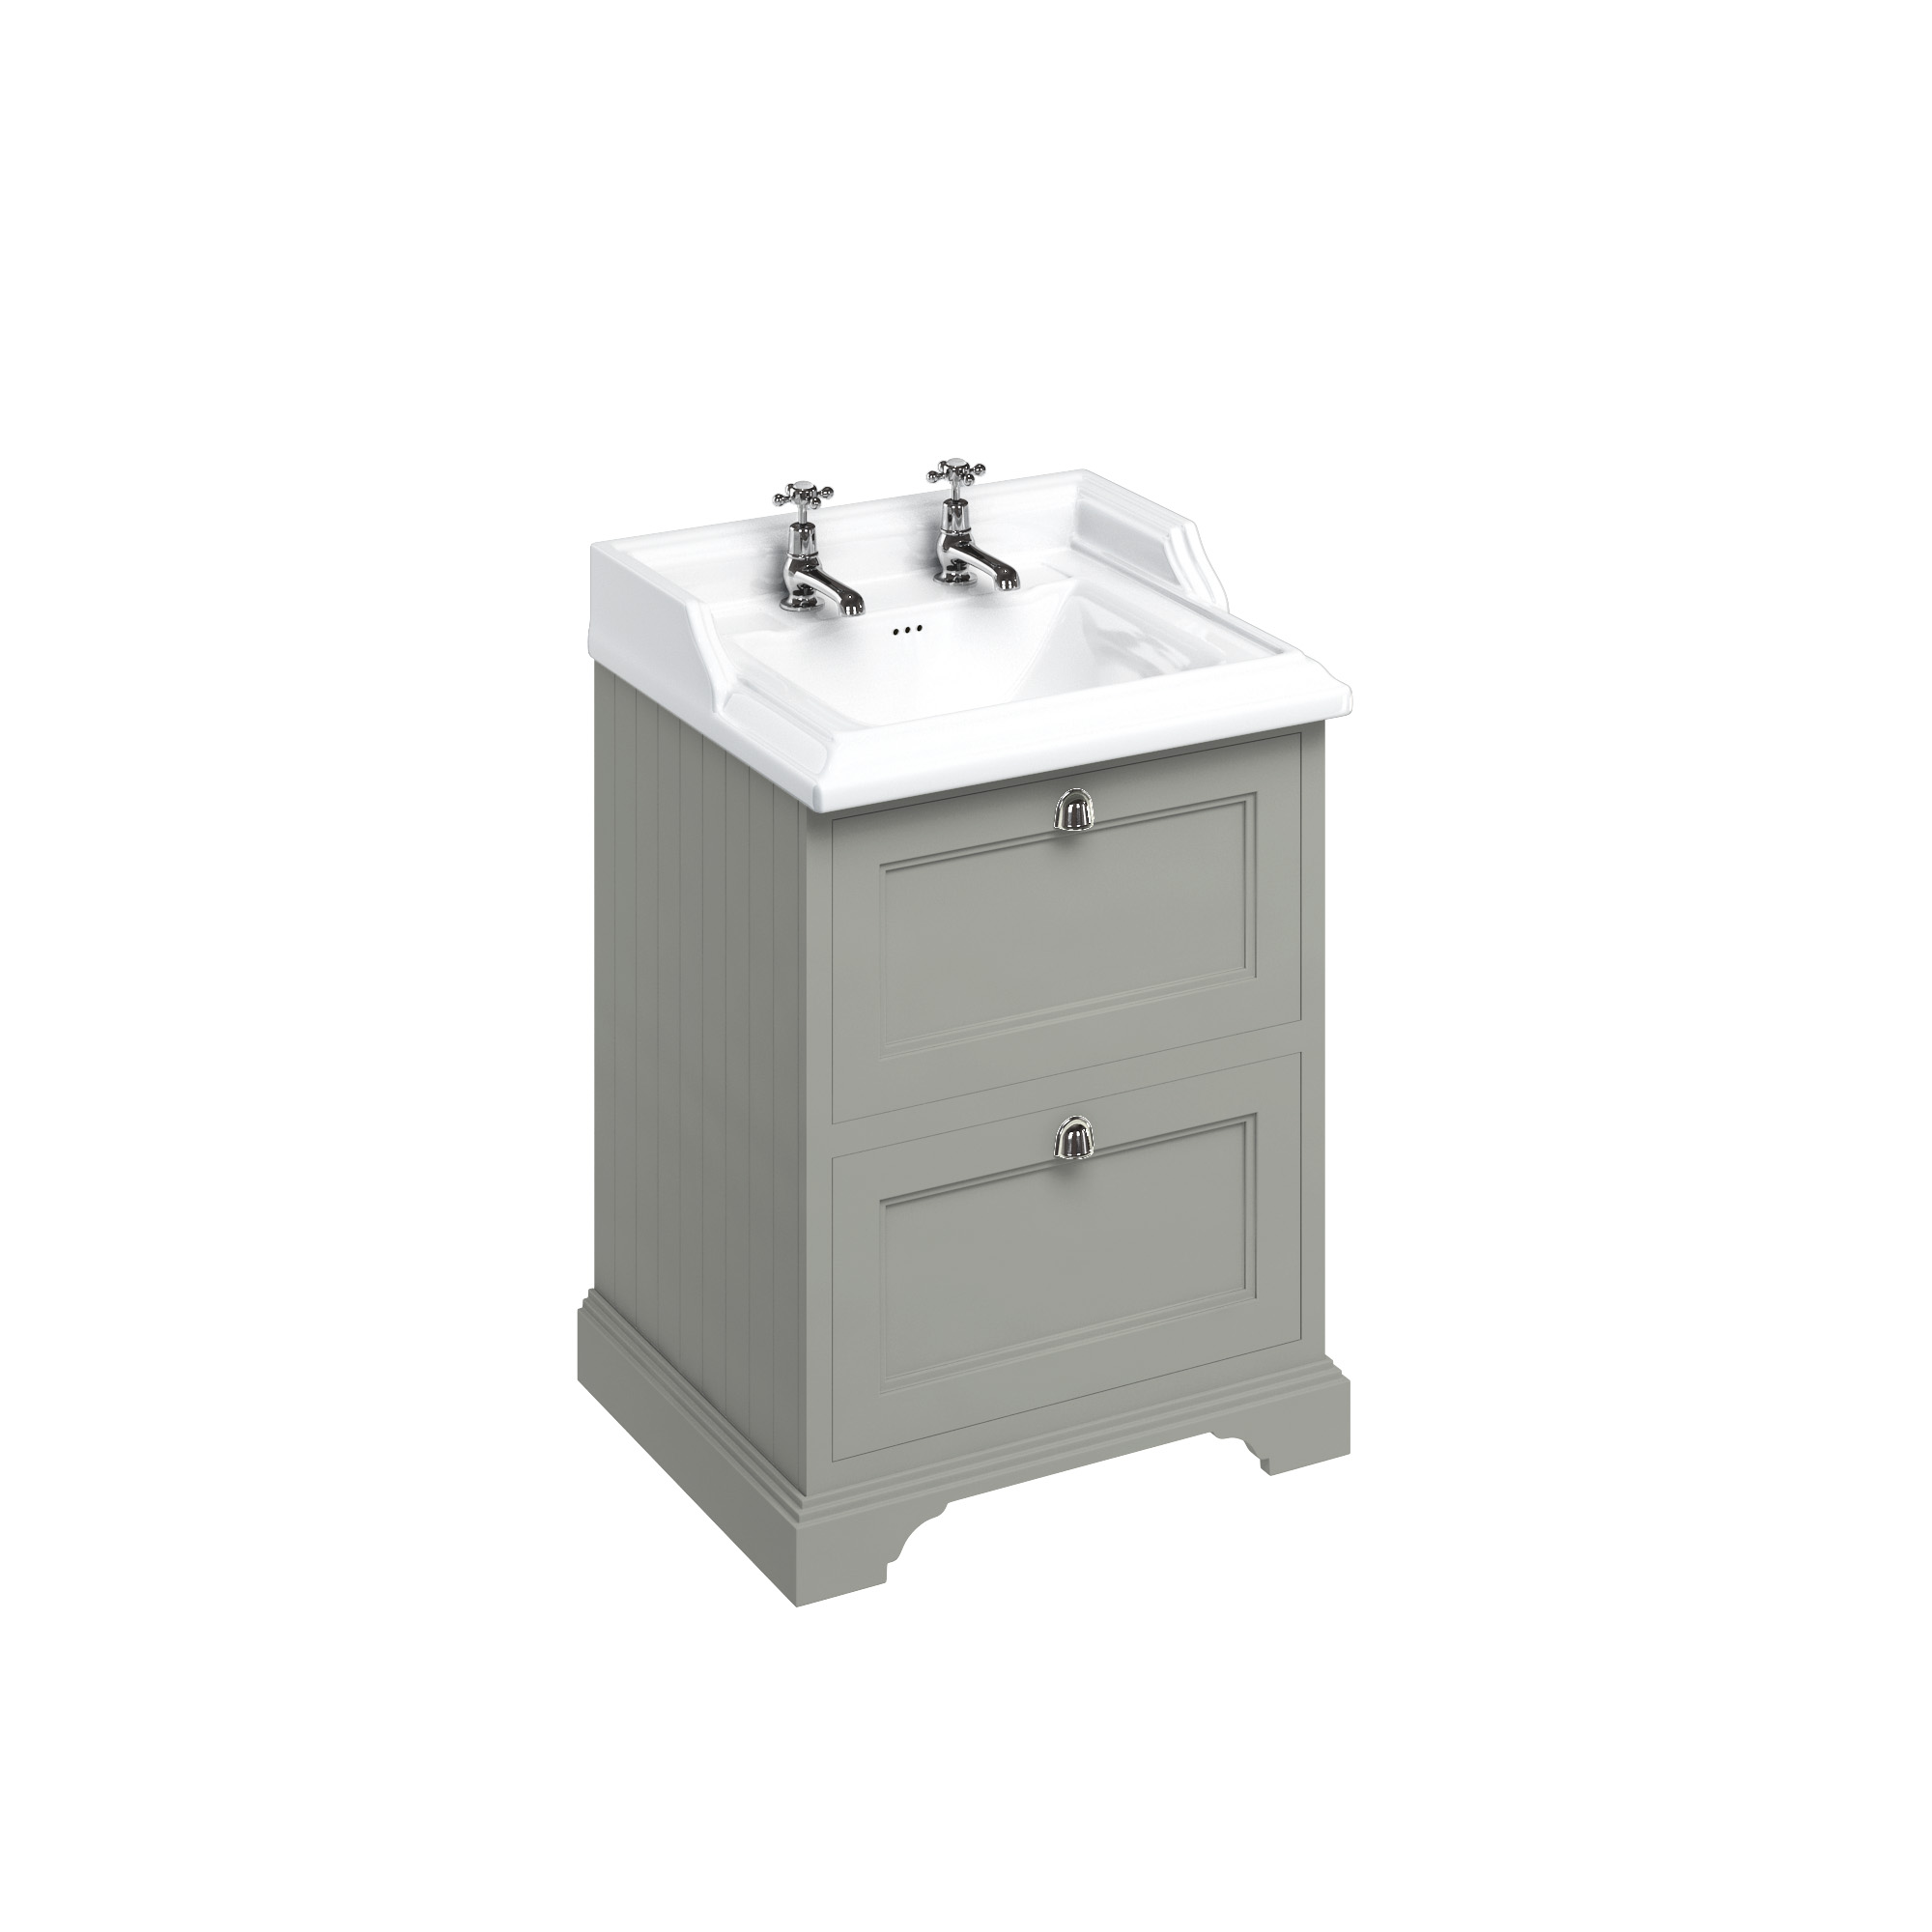 Freestanding 650 vanity unit with drawers & Classic 650 basin for standard waste & overflow